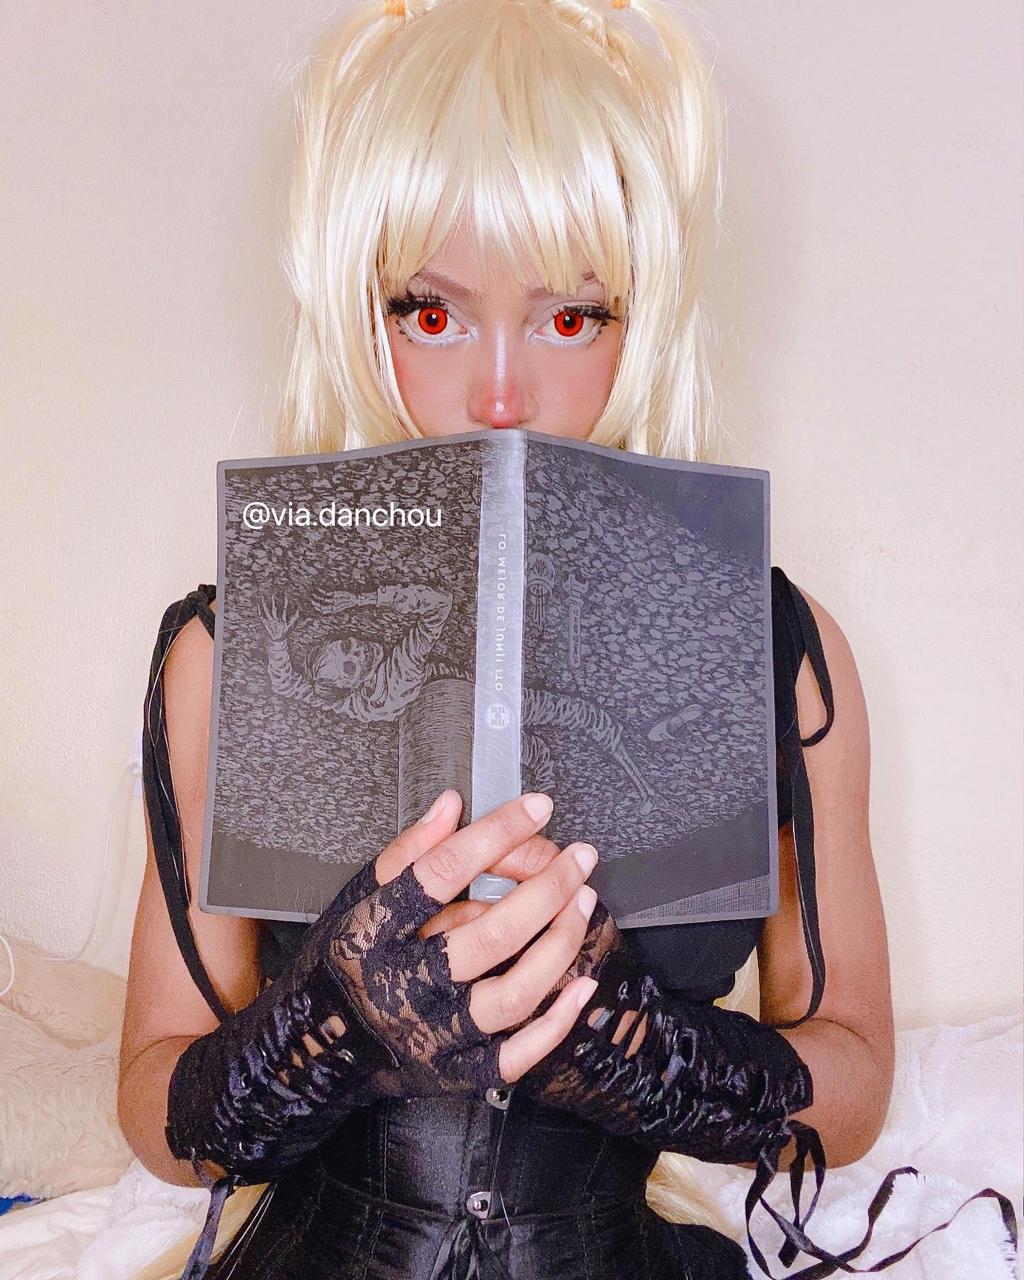 Self Misa Amane From Death Note